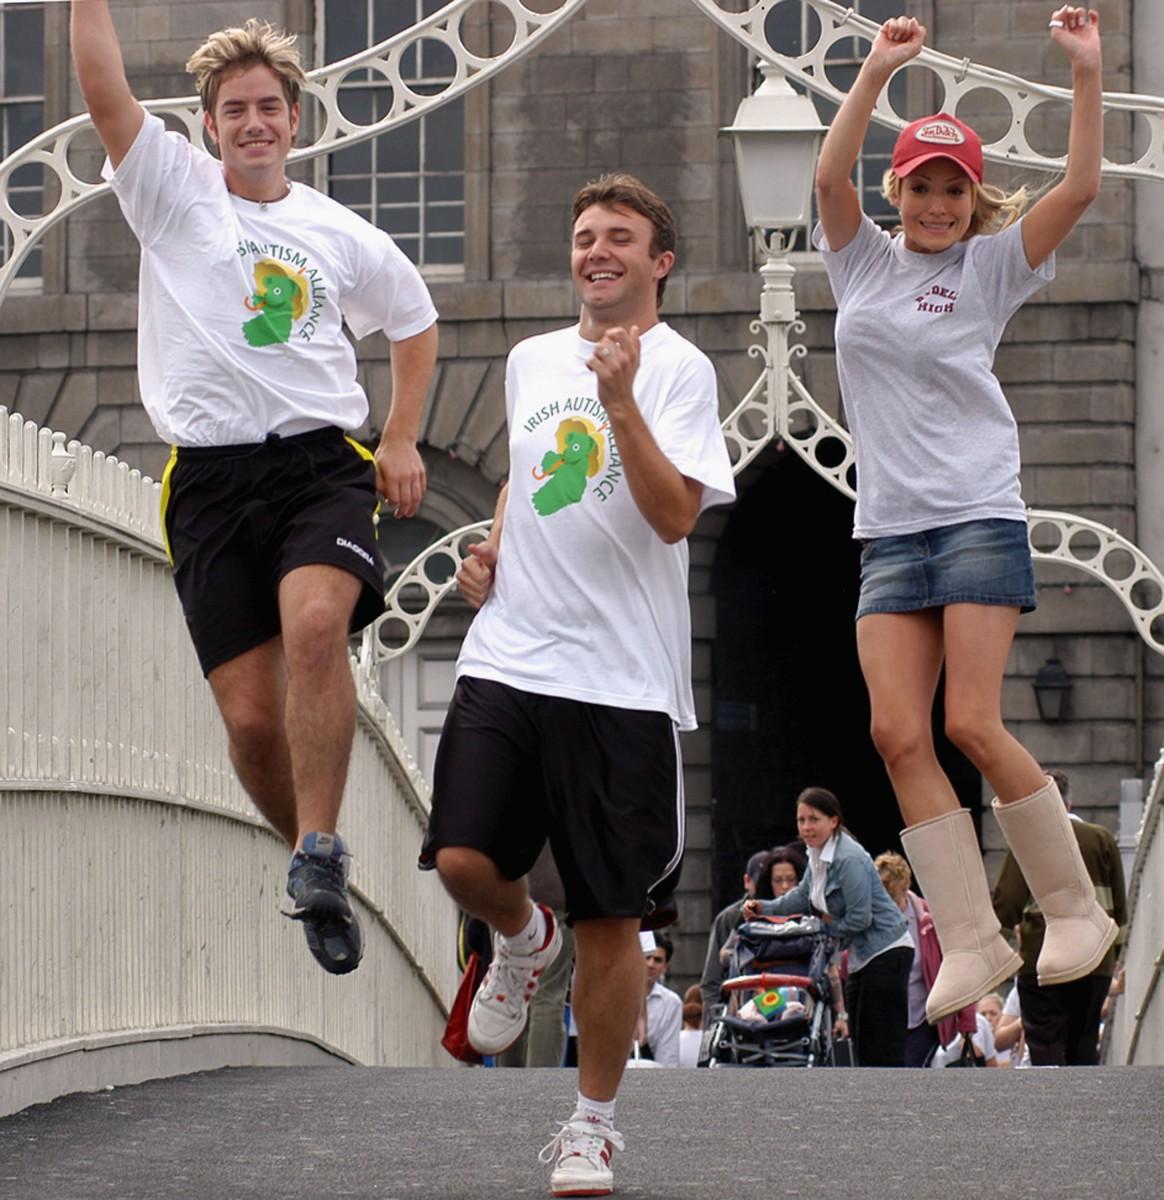 <a><img class="size-large wp-image-1786127" title="FOR A GOOD CAUSE: (L-R) Simon Casey, Jonathan Wilkes, Hayley Evetts and the rest of the cast from 'Grease' take part in a charity Fun Run from the Ha'Penny Bridge to The Point Theatre on August 10th, 2004 in Dublin, Ireland. Such runs are often organised by volunteer organisations" src="https://www.theepochtimes.com/assets/uploads/2015/09/Grease_51157306.jpg" alt="FOR A GOOD CAUSE: (L-R) Simon Casey, Jonathan Wilkes, Hayley Evetts and the rest of the cast from 'Grease' take part in a charity Fun Run from the Ha'Penny Bridge to The Point Theatre on August 10th, 2004 in Dublin, Ireland. Such runs are often organised by volunteer organisations" width="573" height="590"/></a>